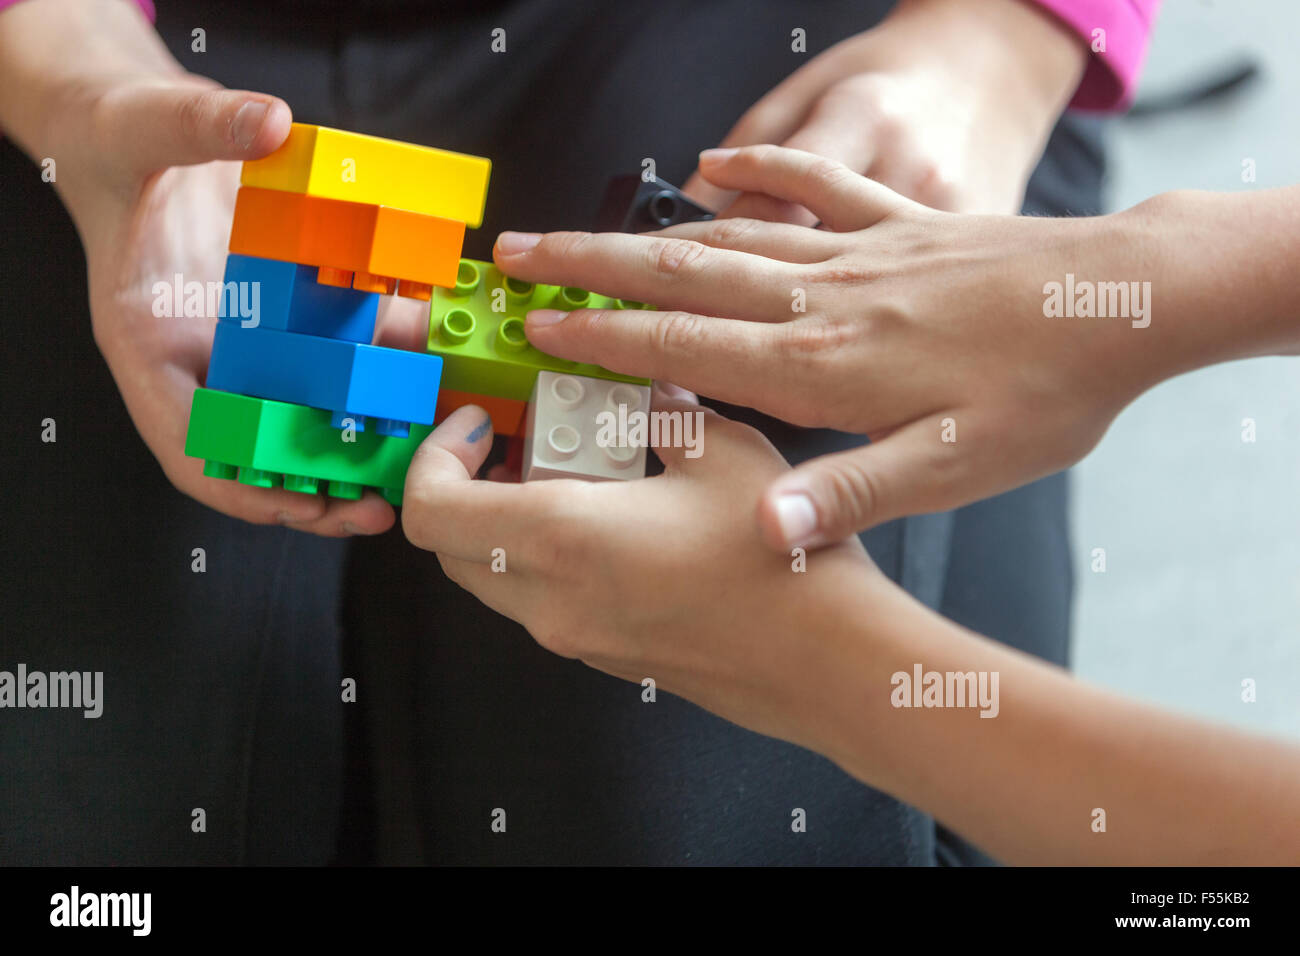 Plastic cubes in the hands of a child's game that develops creativity and imagination, lego bricks Children hands play with colorful lego blocks Stock Photo